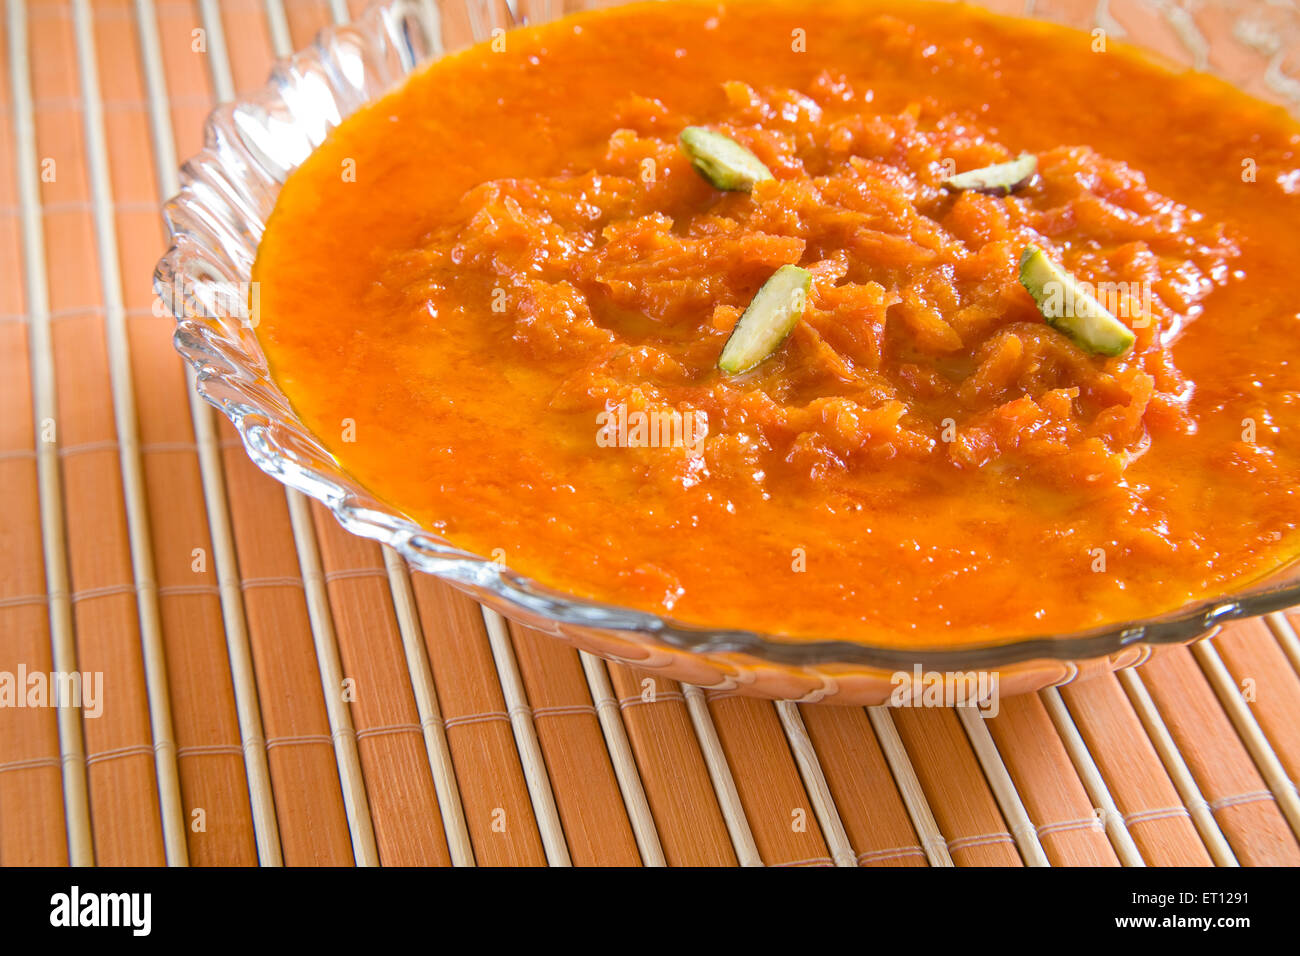 Indian food ; sweet dessert carrots pudding garnish with pistachio served in bowl 19 February 2010 Stock Photo